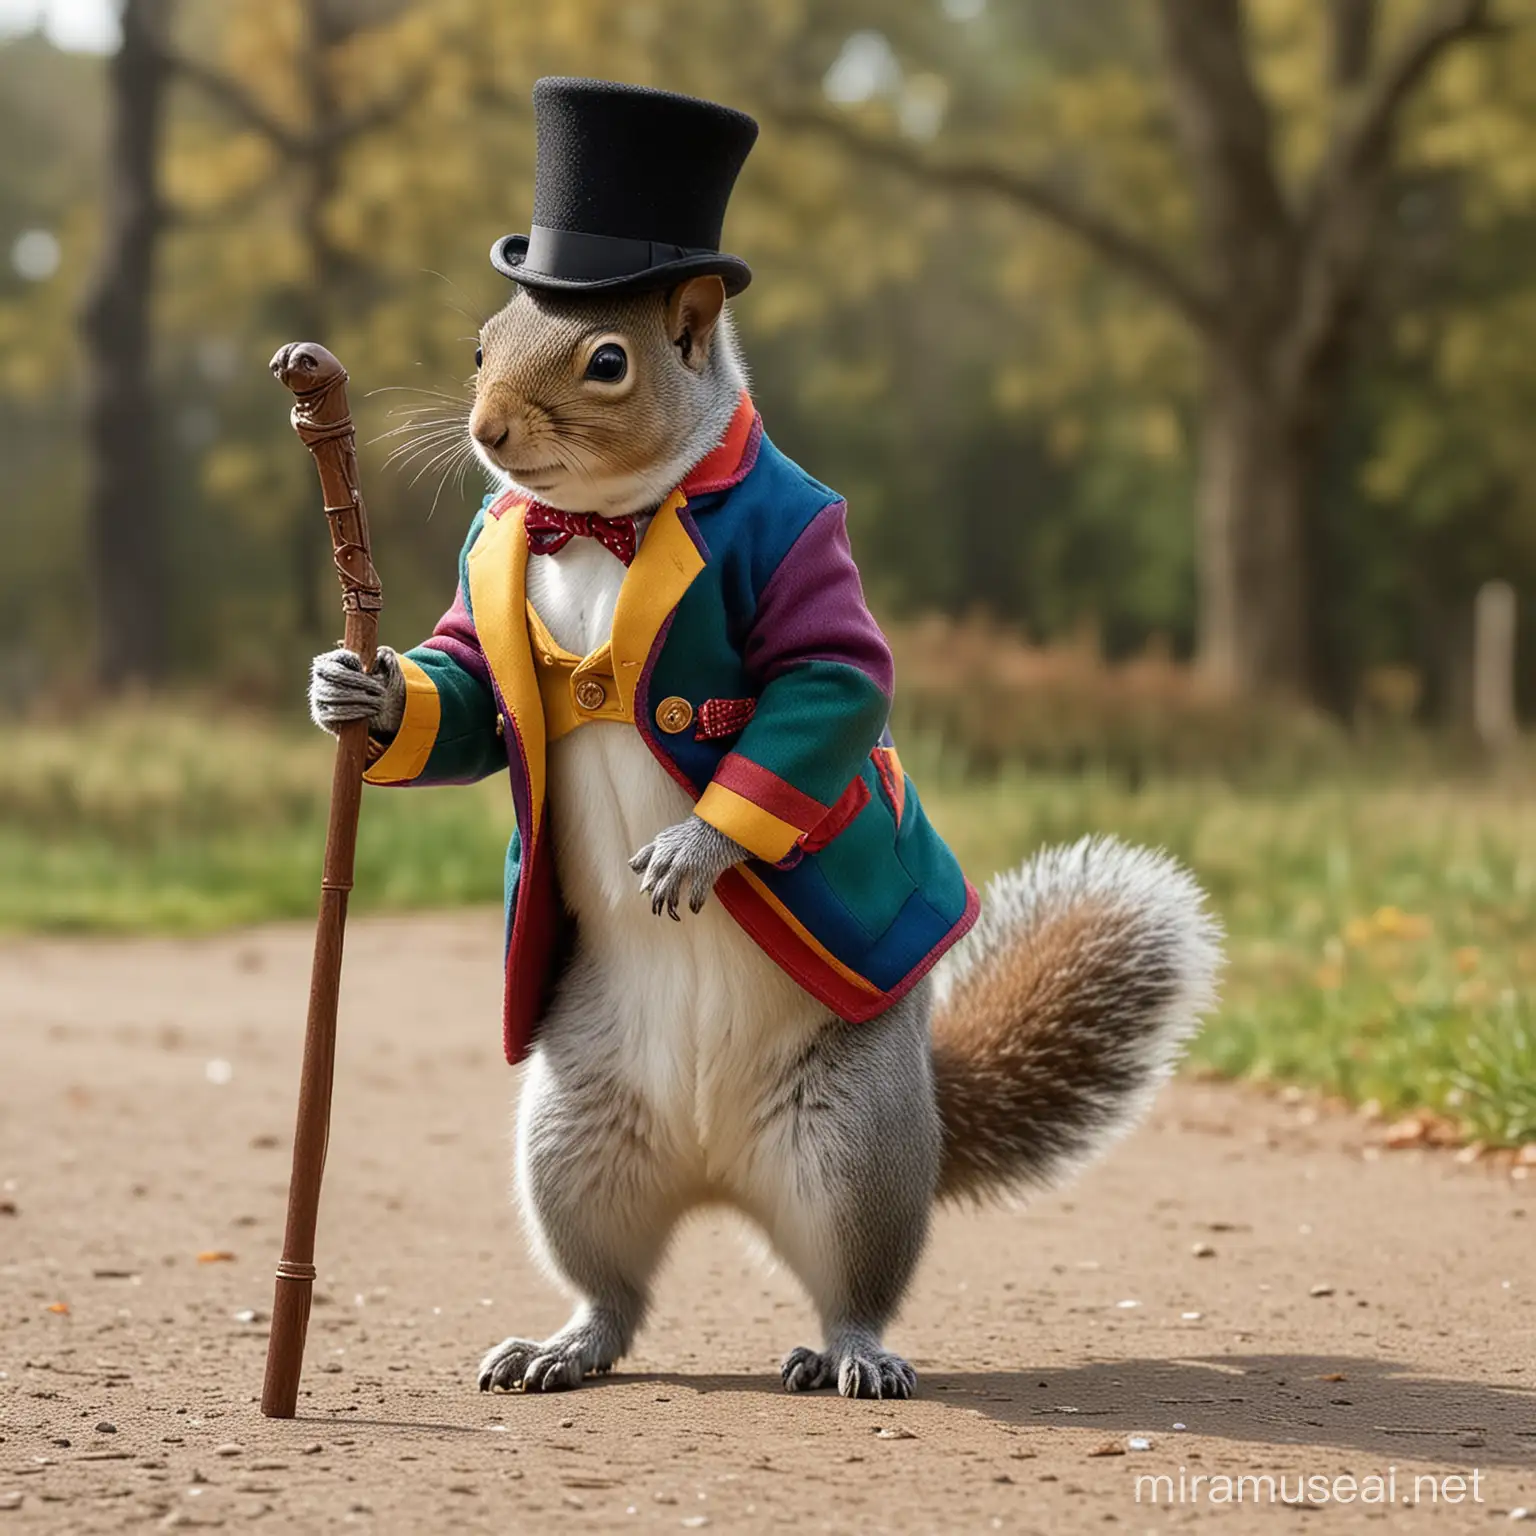 Squirrel walking on 2 legs upright wearing a top hat , walking with  a cane and wearing a multi-colored jacket